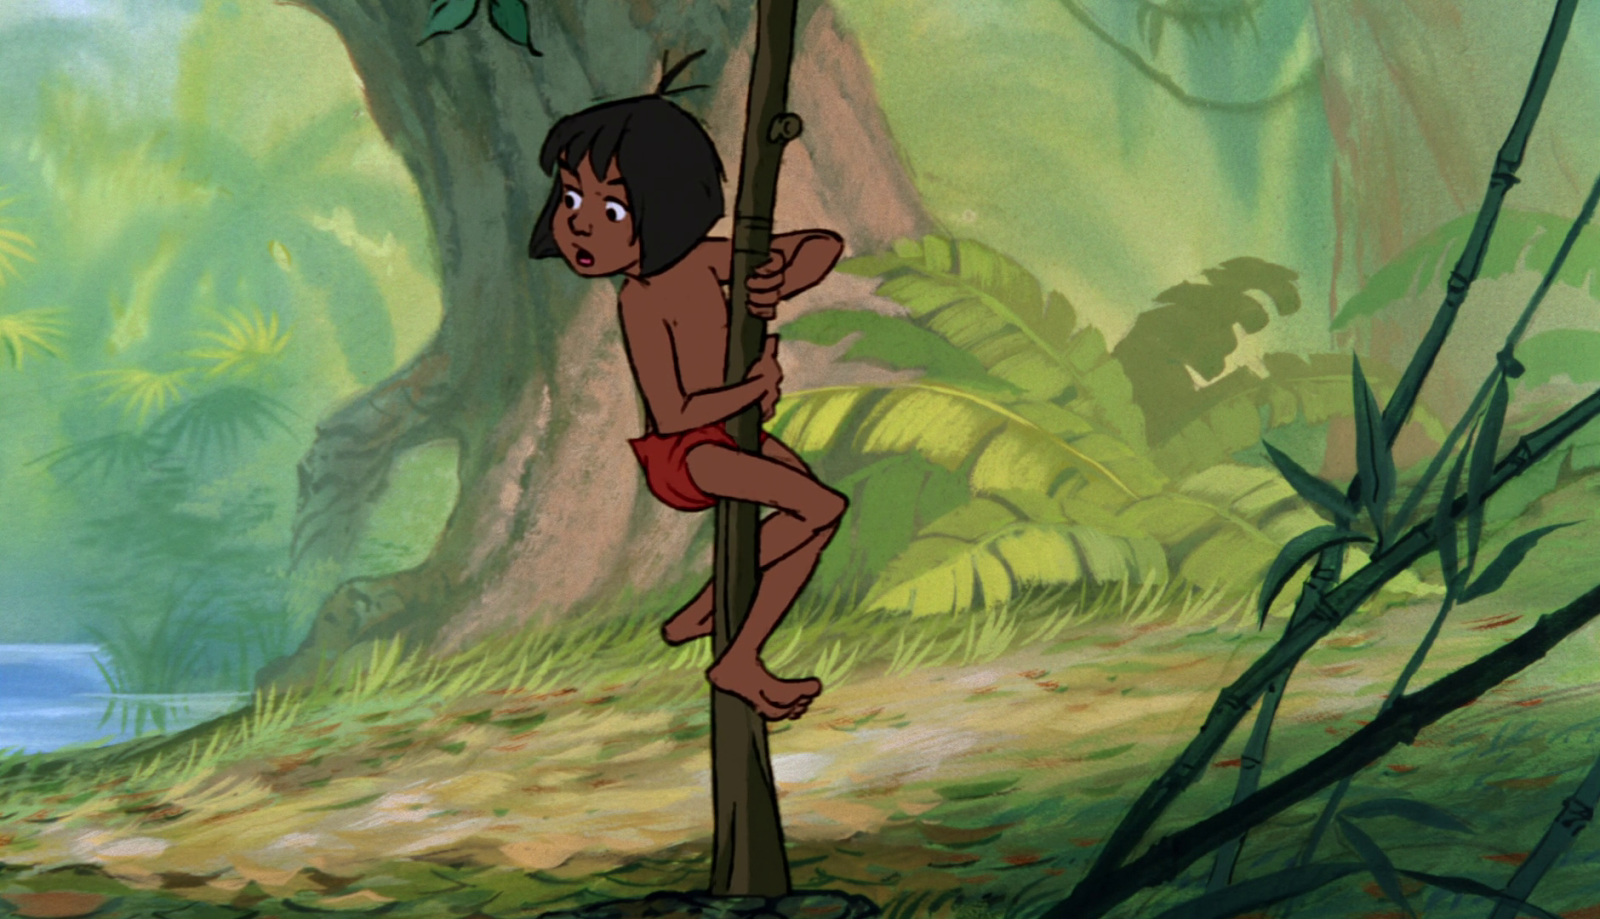 Disney Animated Movies for Life: The Jungle Book Part 1.